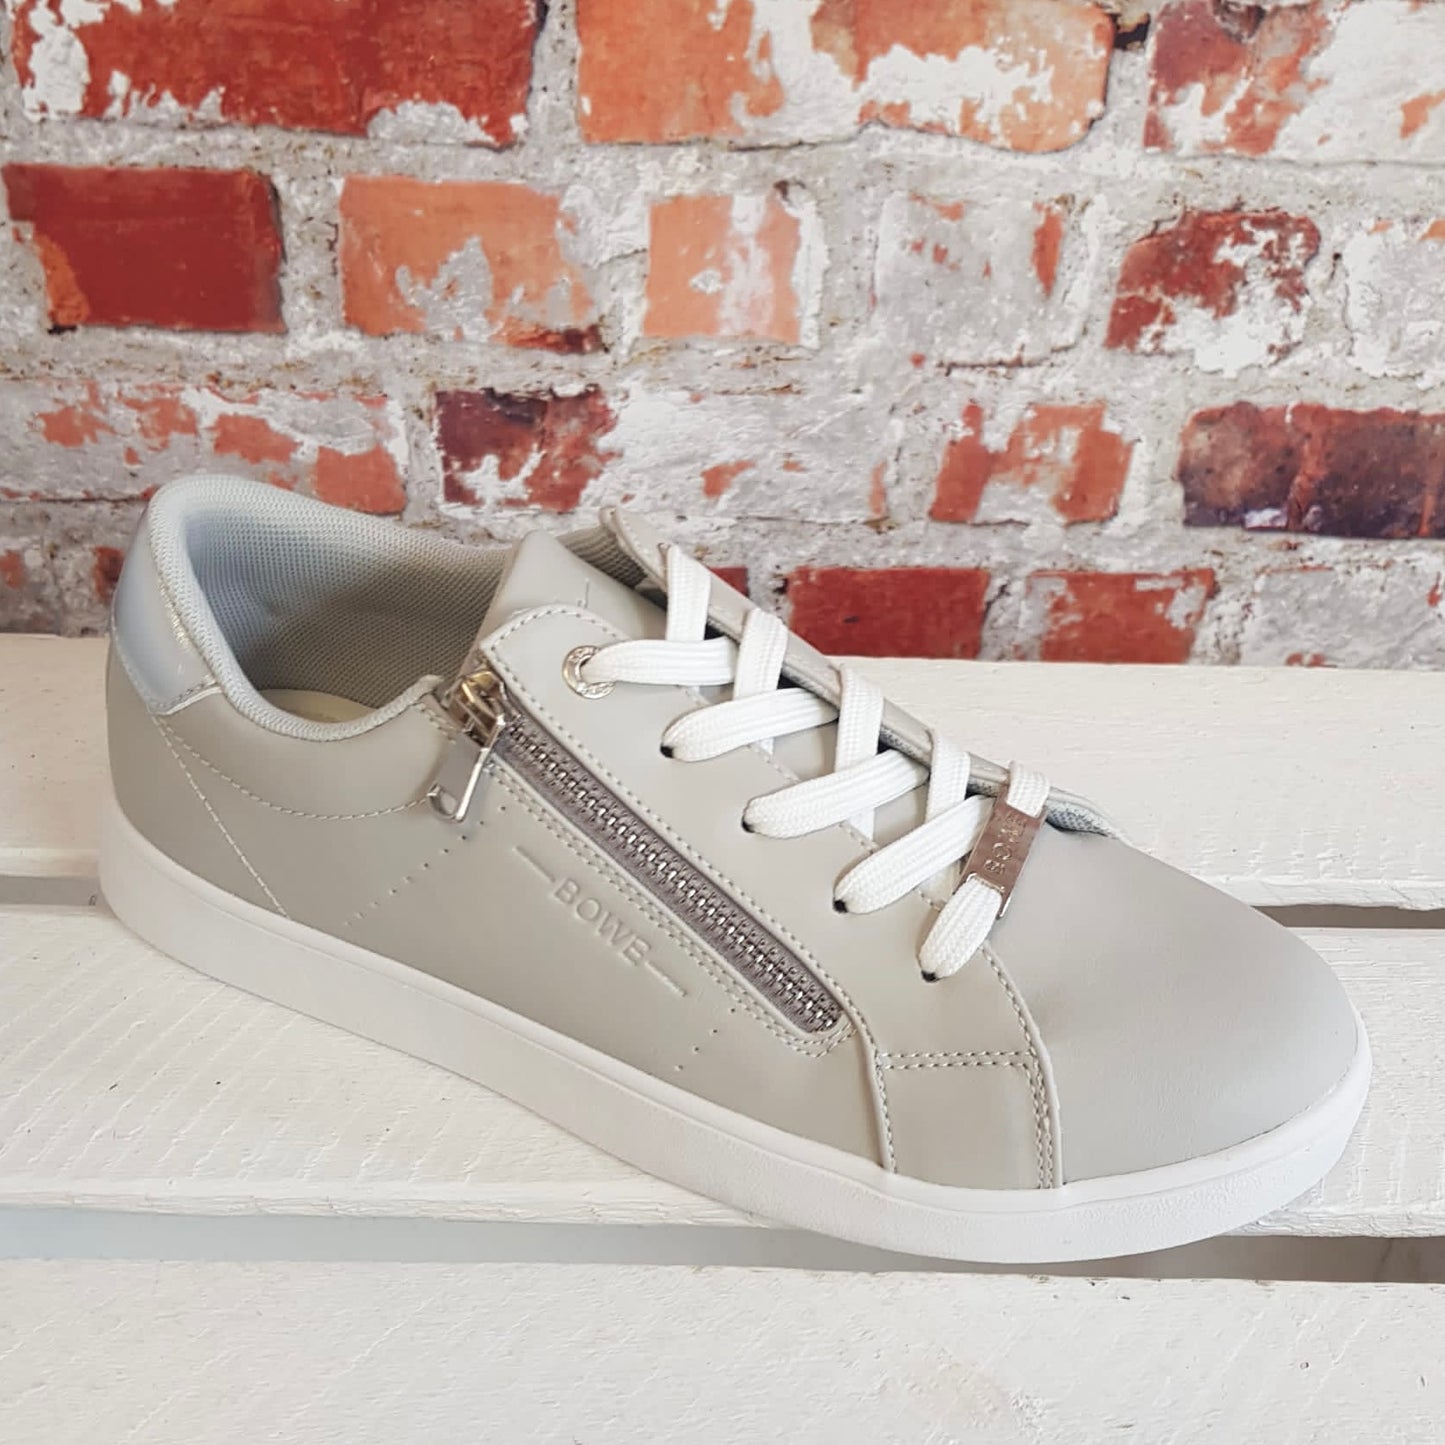 Tommy Bowe For Her - 'Flucher' Smoke Linings Trainer